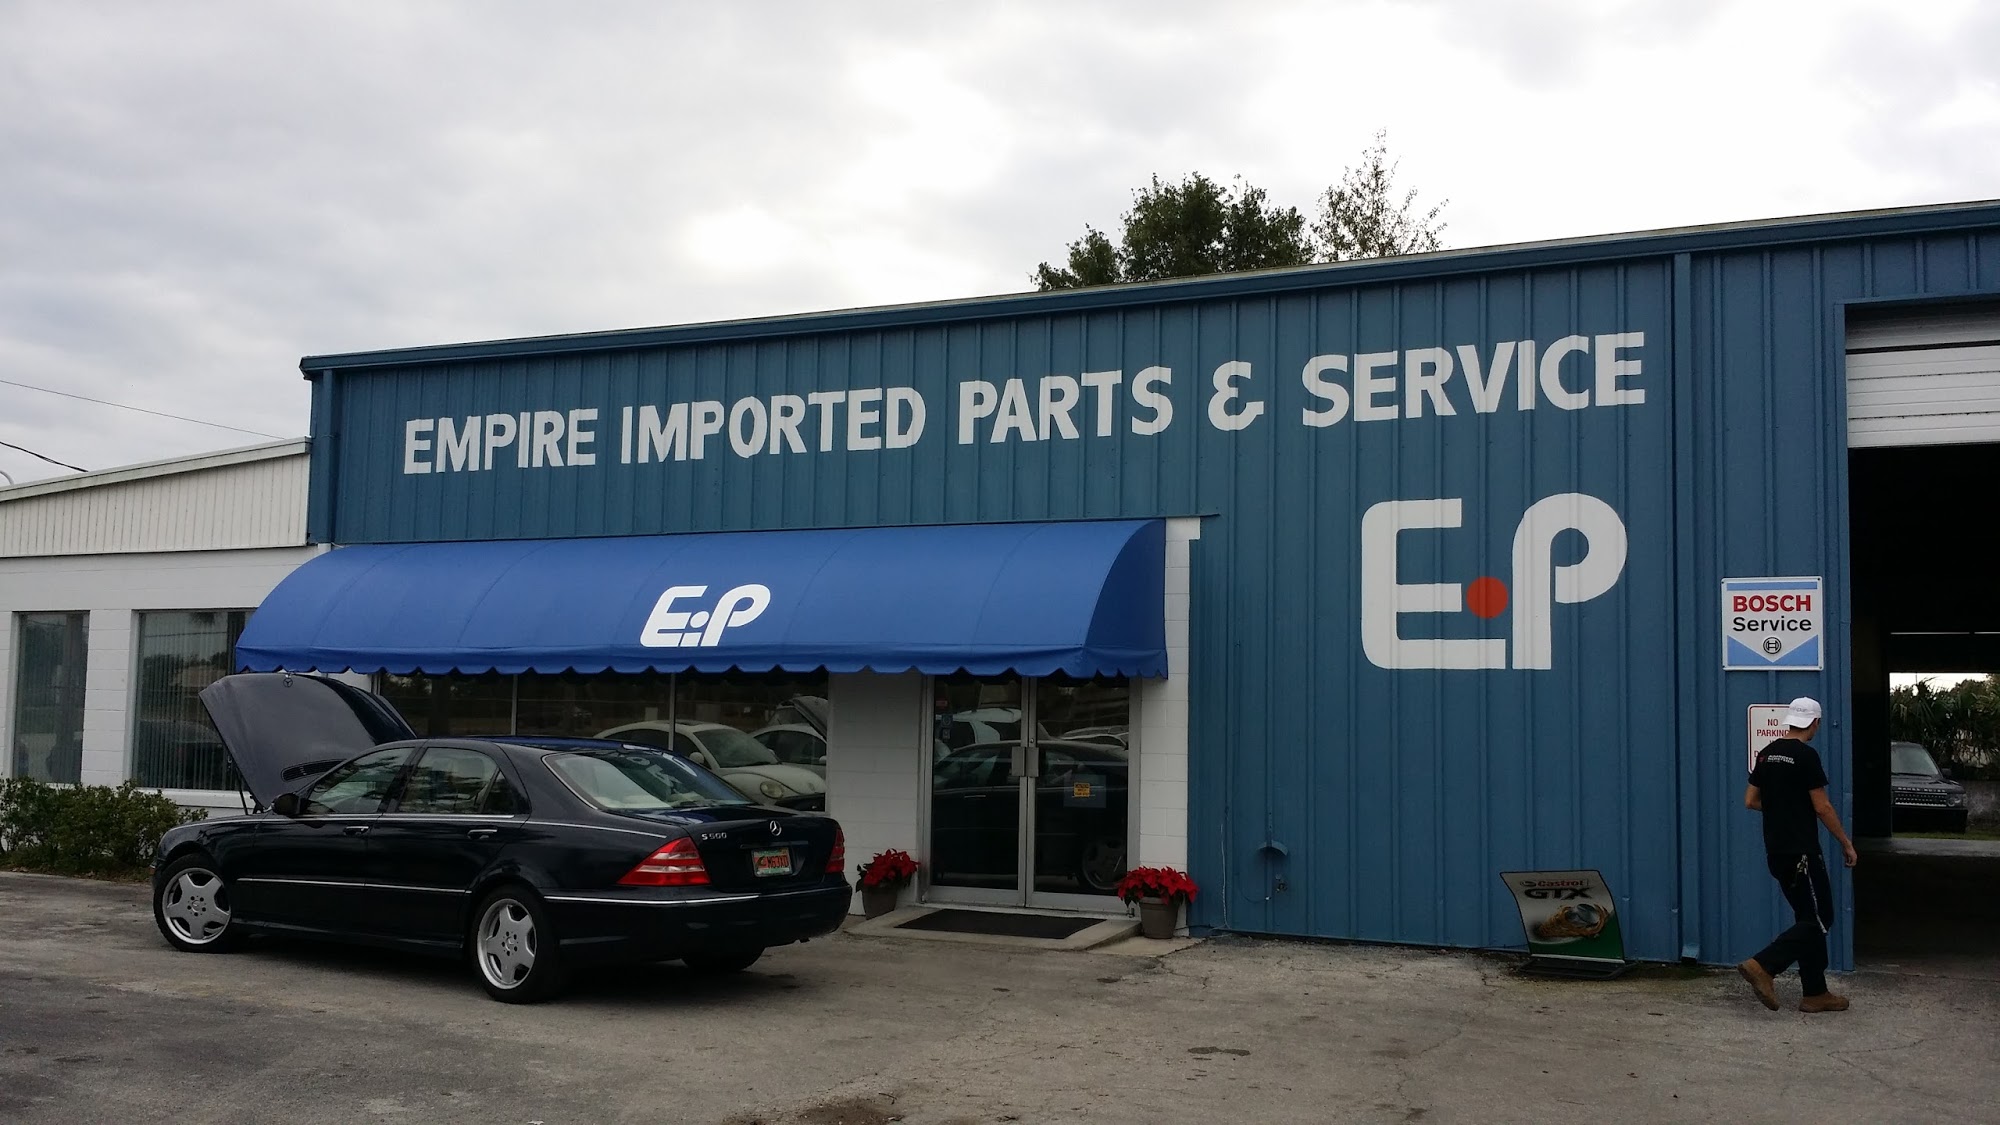 Empire Imported Parts & Service